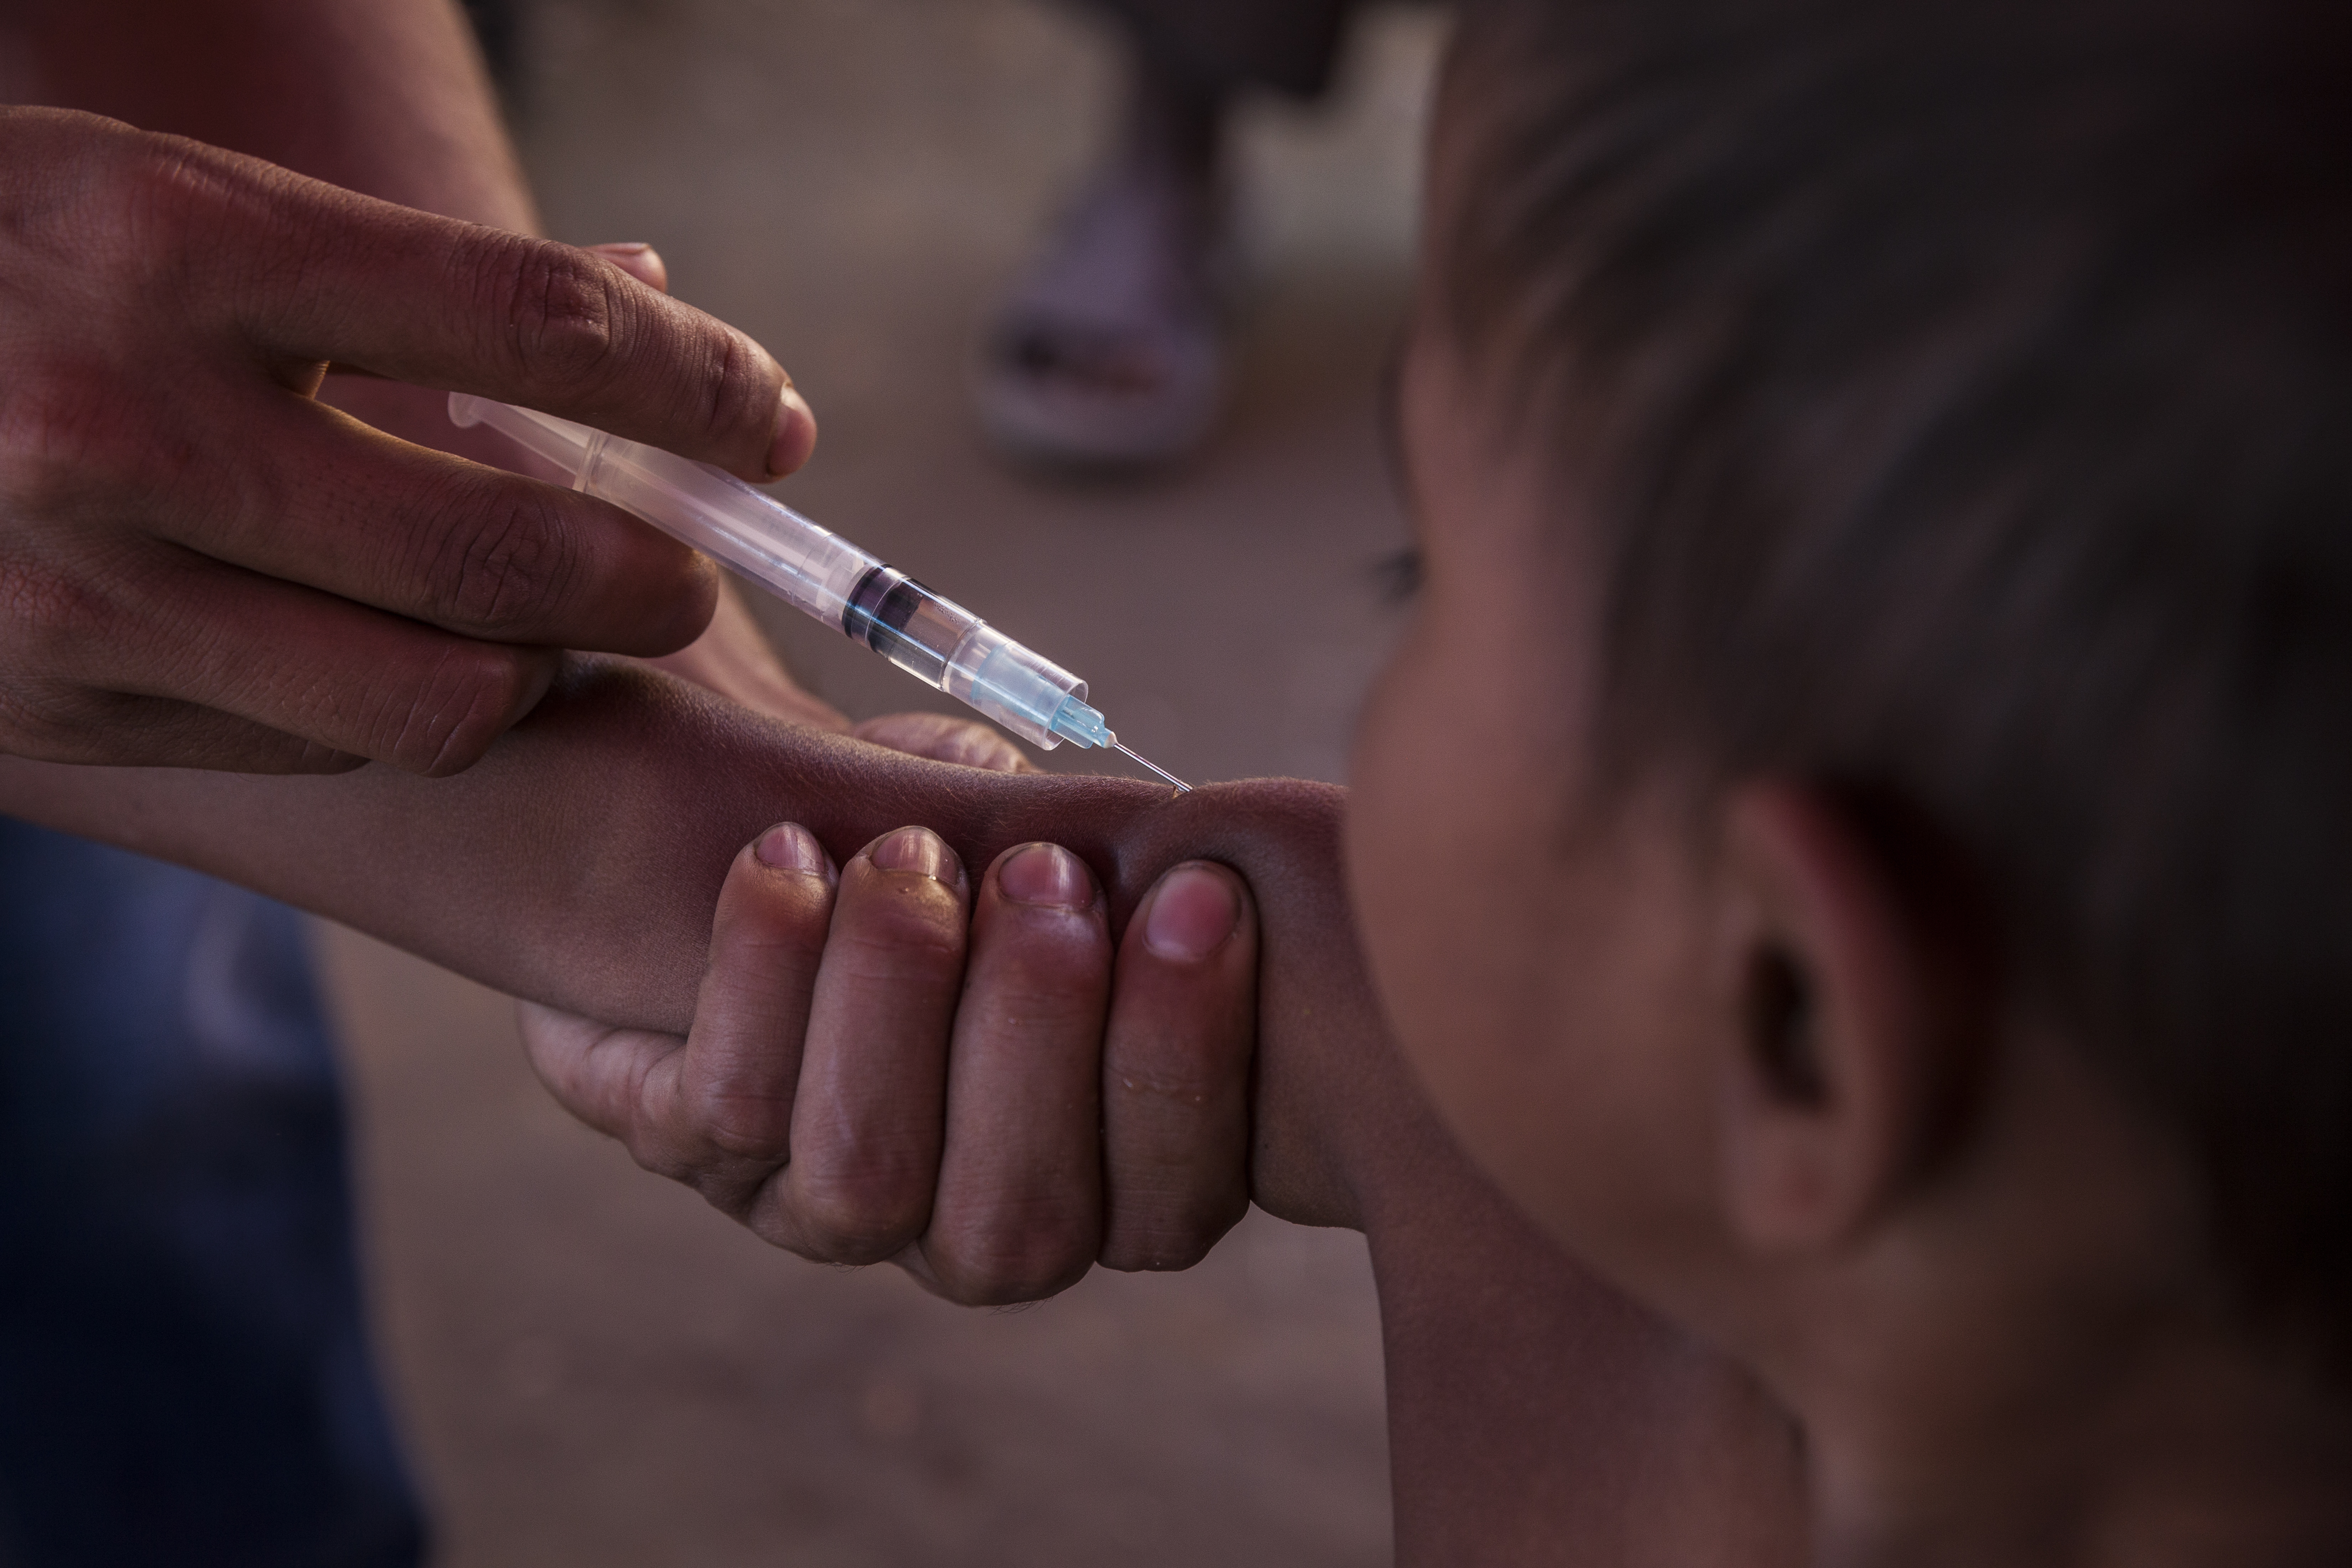 On 30 November 2017 in Bangladesh, a Rohingya child is immunized in the Unchiprang makeshift refugee camp in Cox’s Bazar district during the UNICEF-supported measles vaccination campaign.